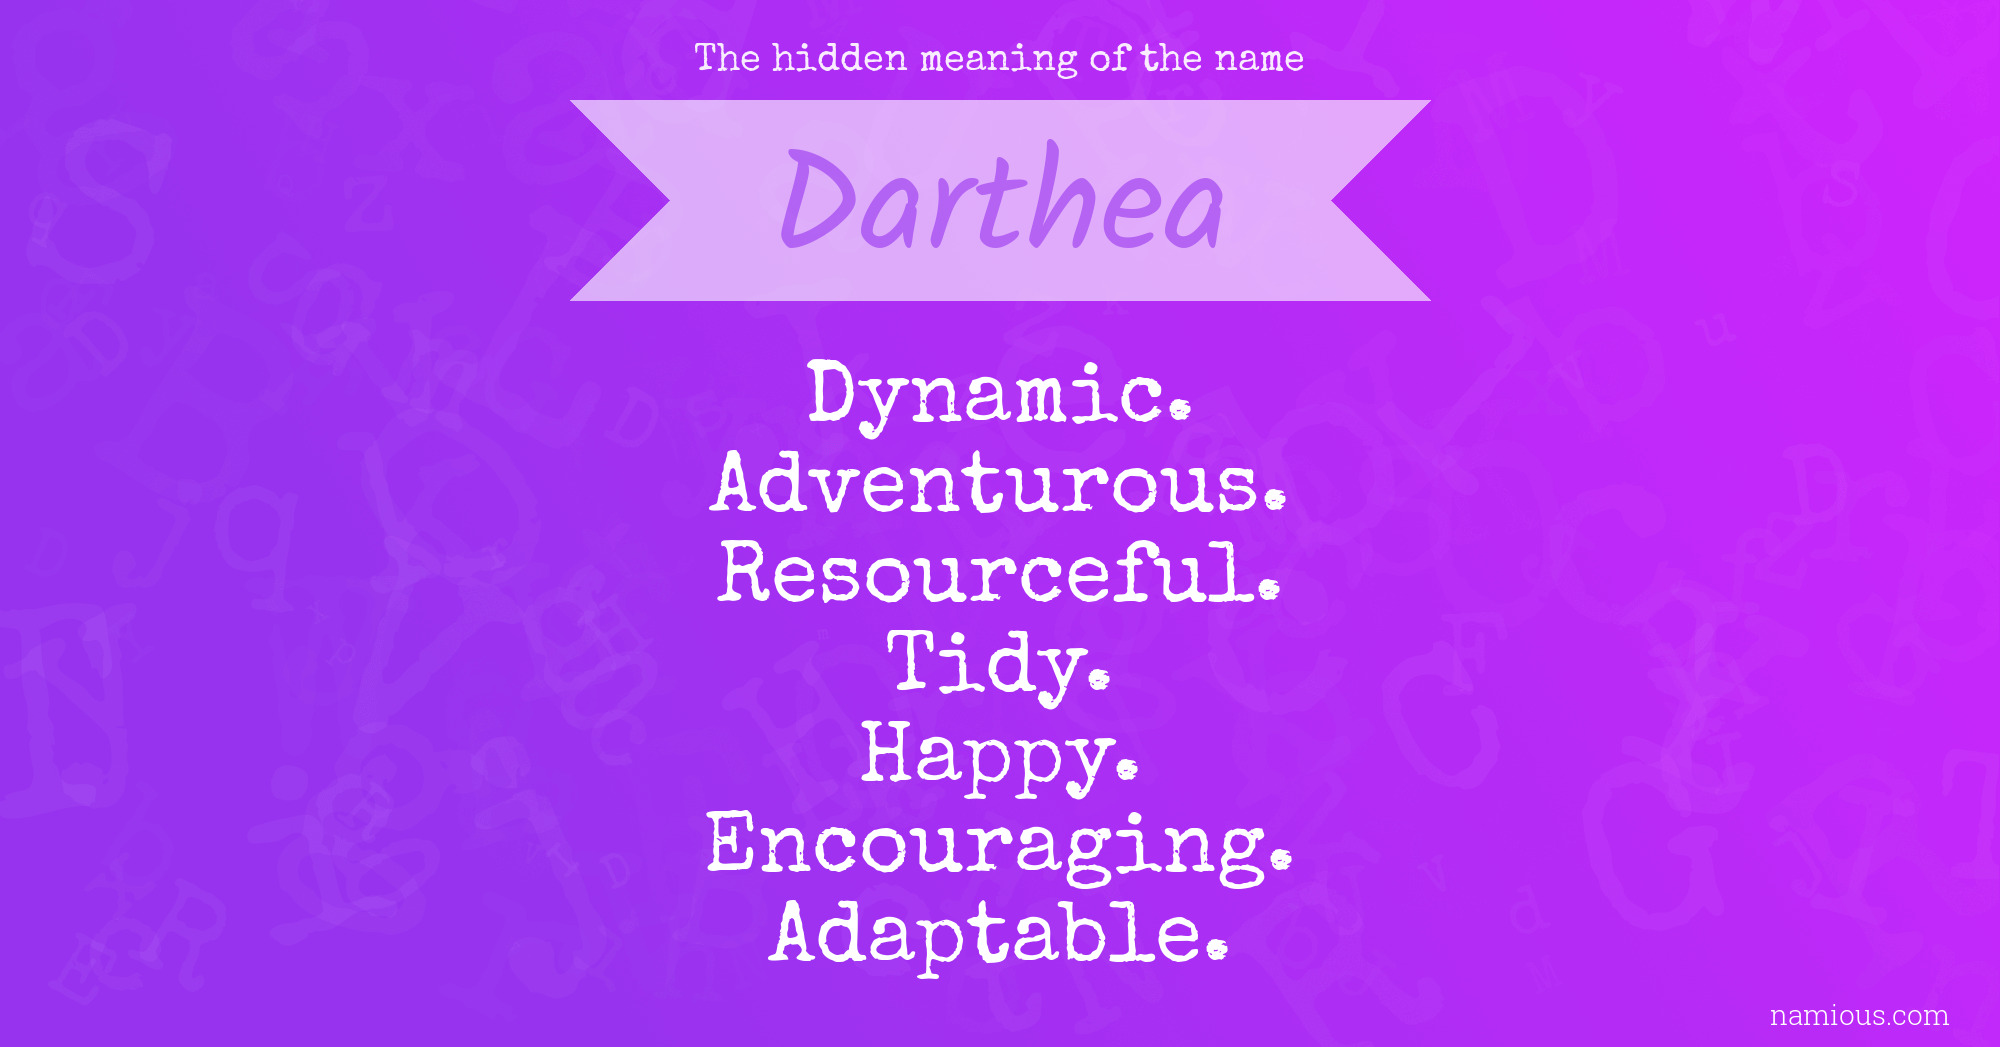 The hidden meaning of the name Darthea